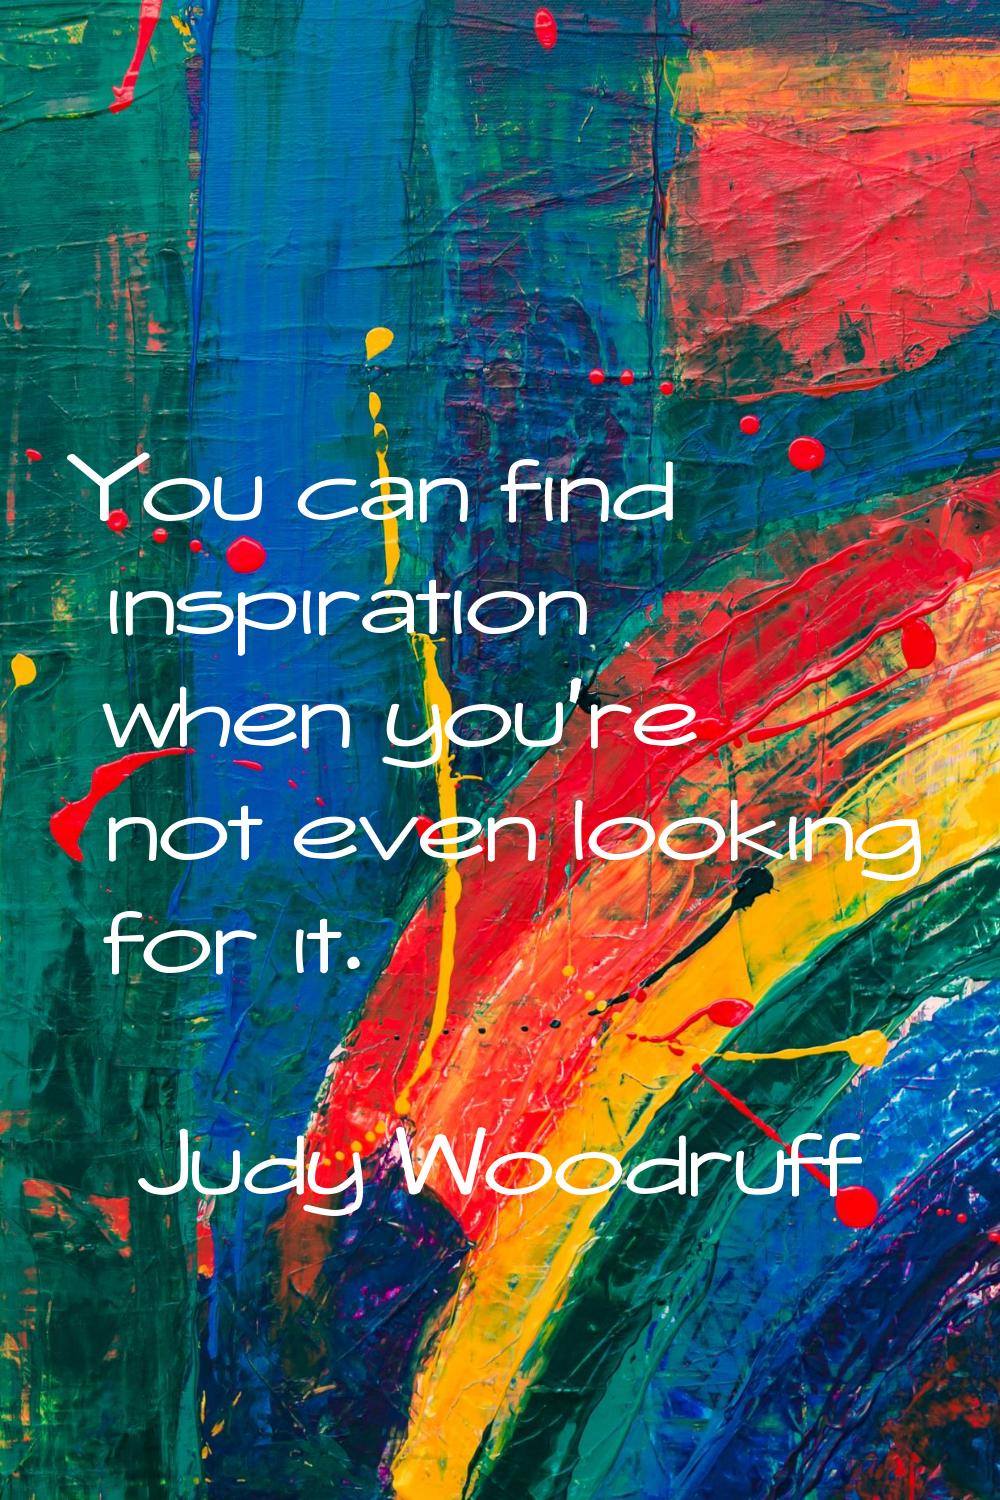 You can find inspiration when you're not even looking for it.